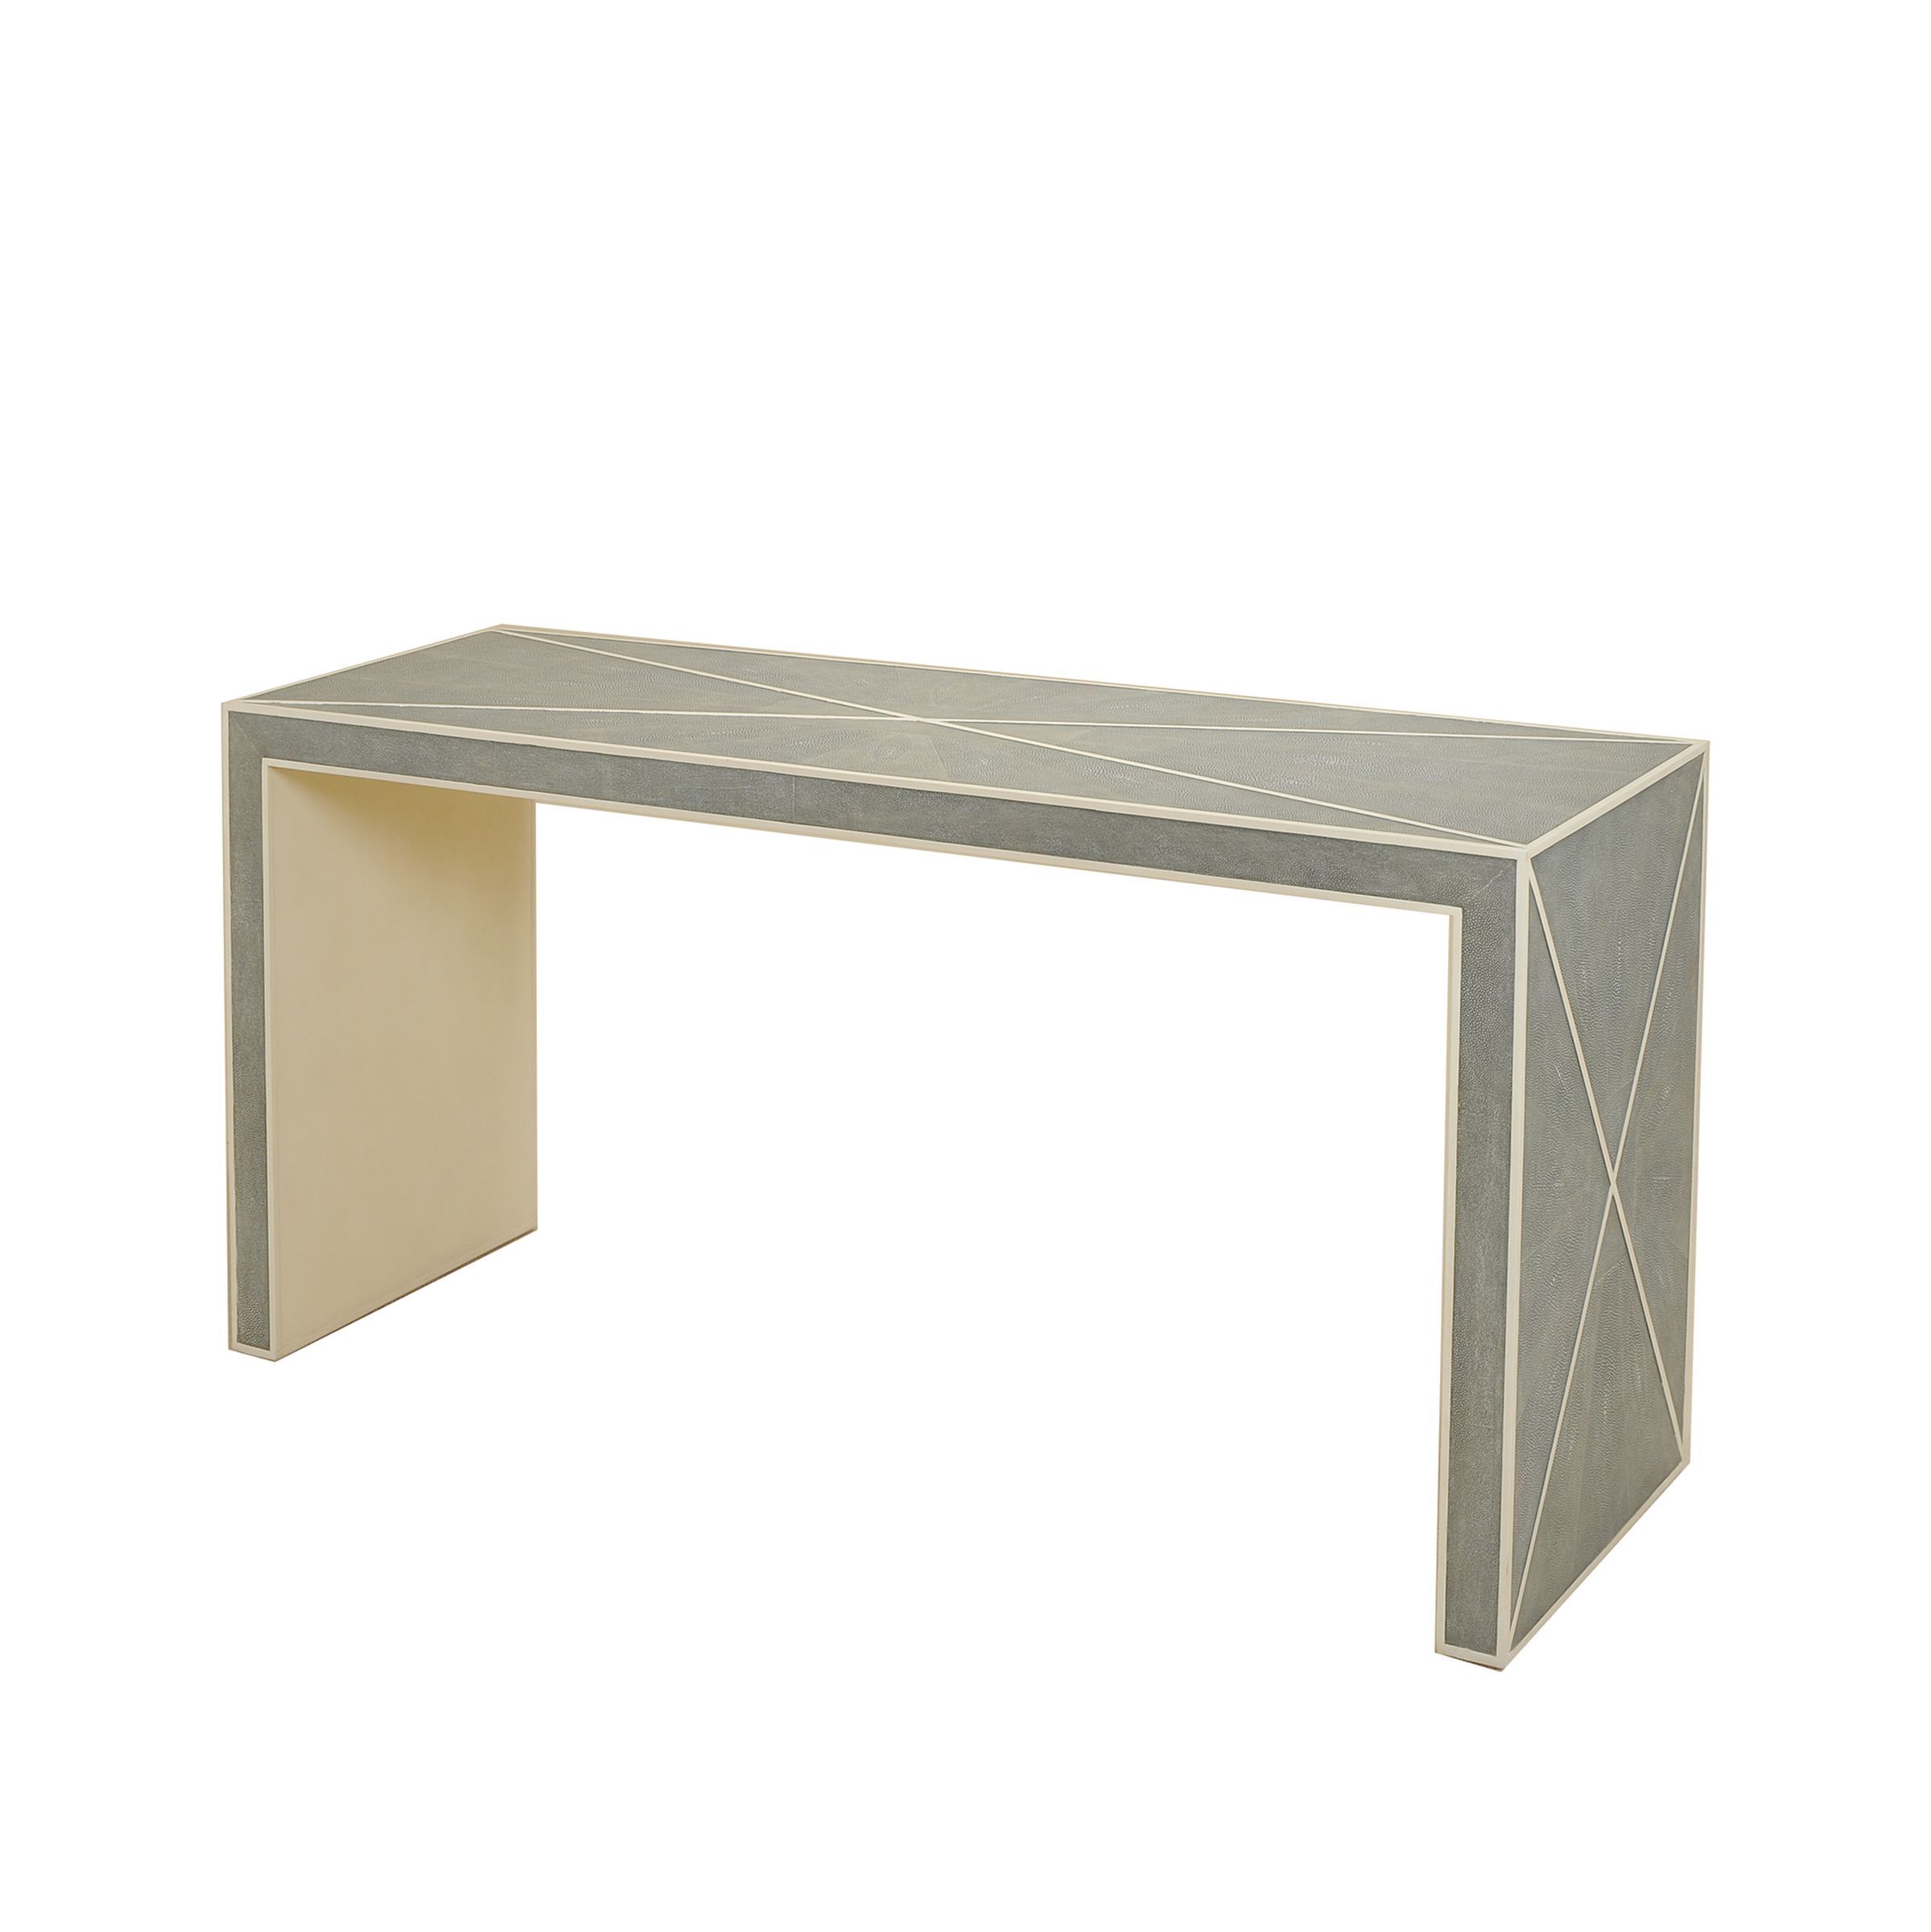 Pinerin Forrey On Phillip | Pinterest | Console Table, Furniture Throughout Phillip Brass Console Tables (View 12 of 30)